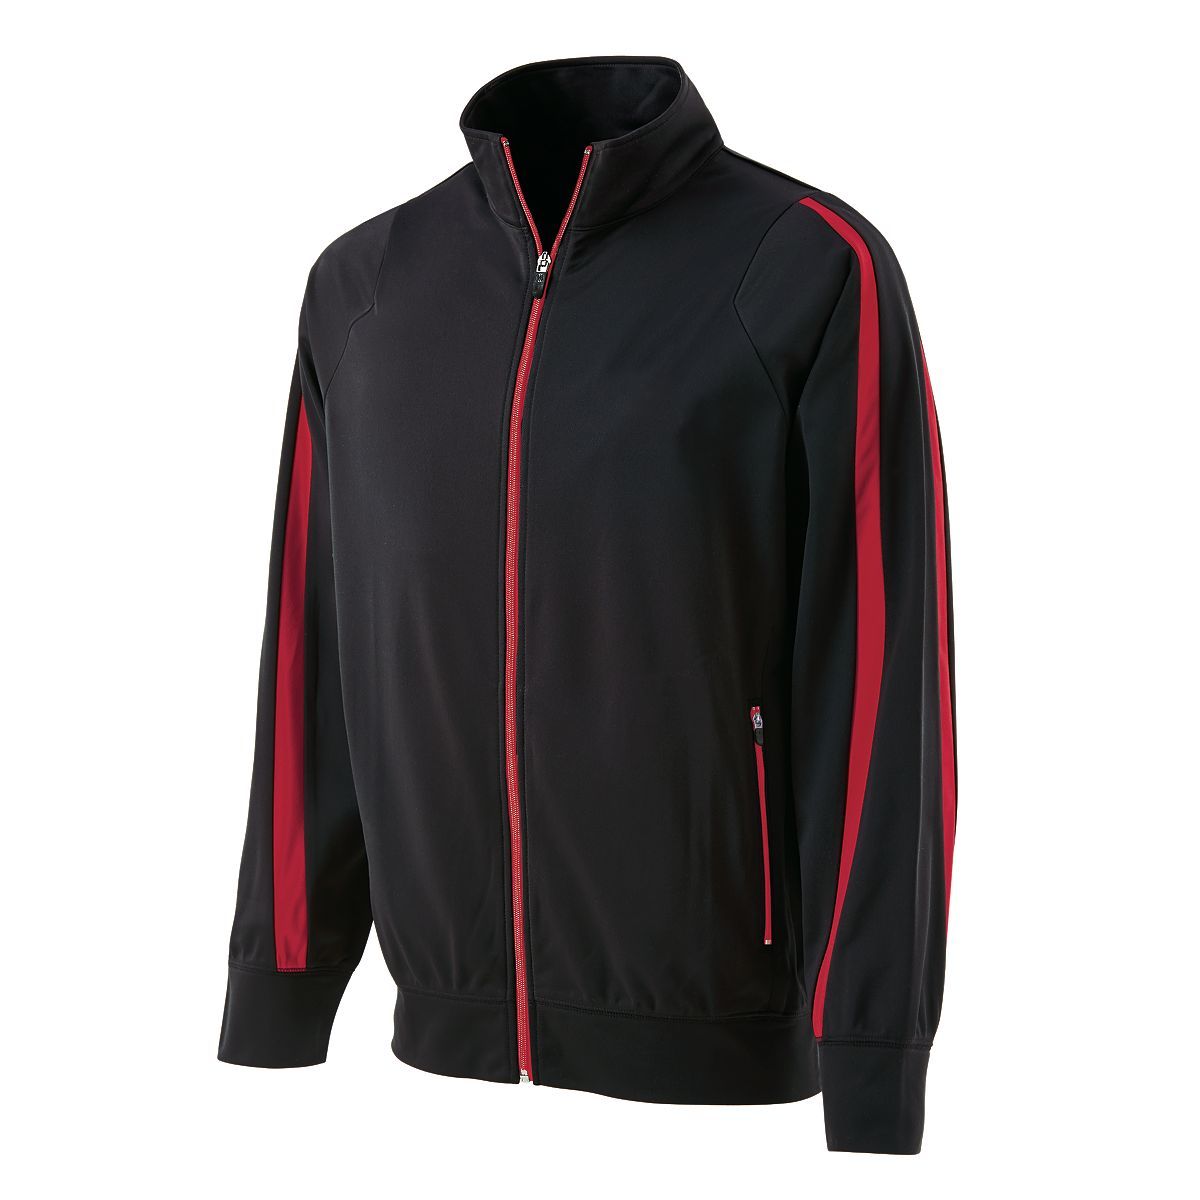 Holloway Determination Jacket in Black/Scarlet  -Part of the Adult, Adult-Jacket, Holloway, Outerwear product lines at KanaleyCreations.com